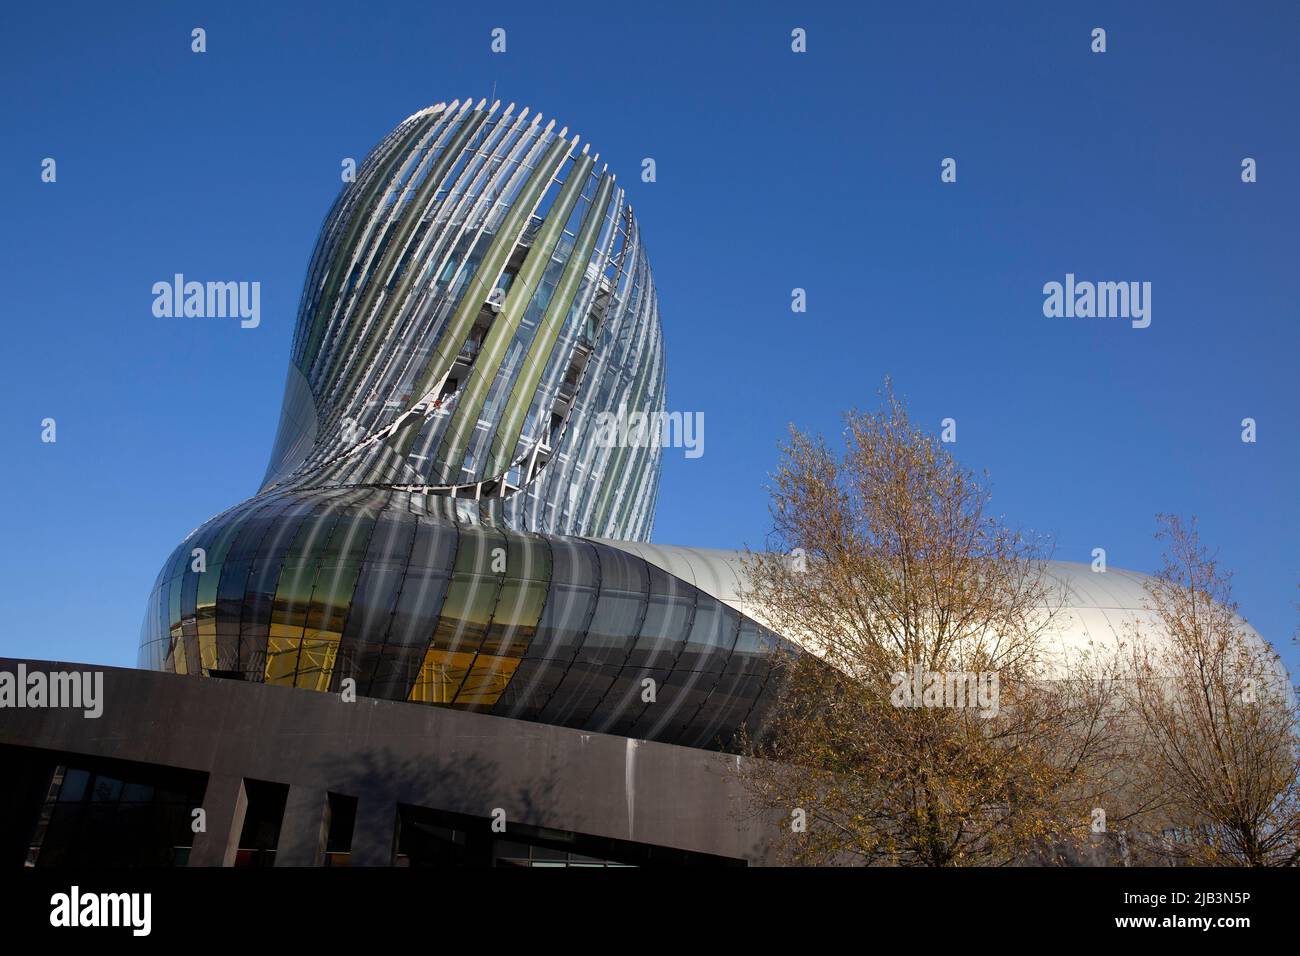 The Cité du Vin in Bordeaux, France on November 19, 2021. The Cité du Vin was inaugurated in 2016 with the goal of celebrating wine and educating people about its production and history. The 13,350 m² space is considered to be the best wine center in the world. It's been designed by the French architectural company, XTU, with the exhibitions designed by the British firm Casson Mann. Photograph by Bénédicte Desrus Stock Photo